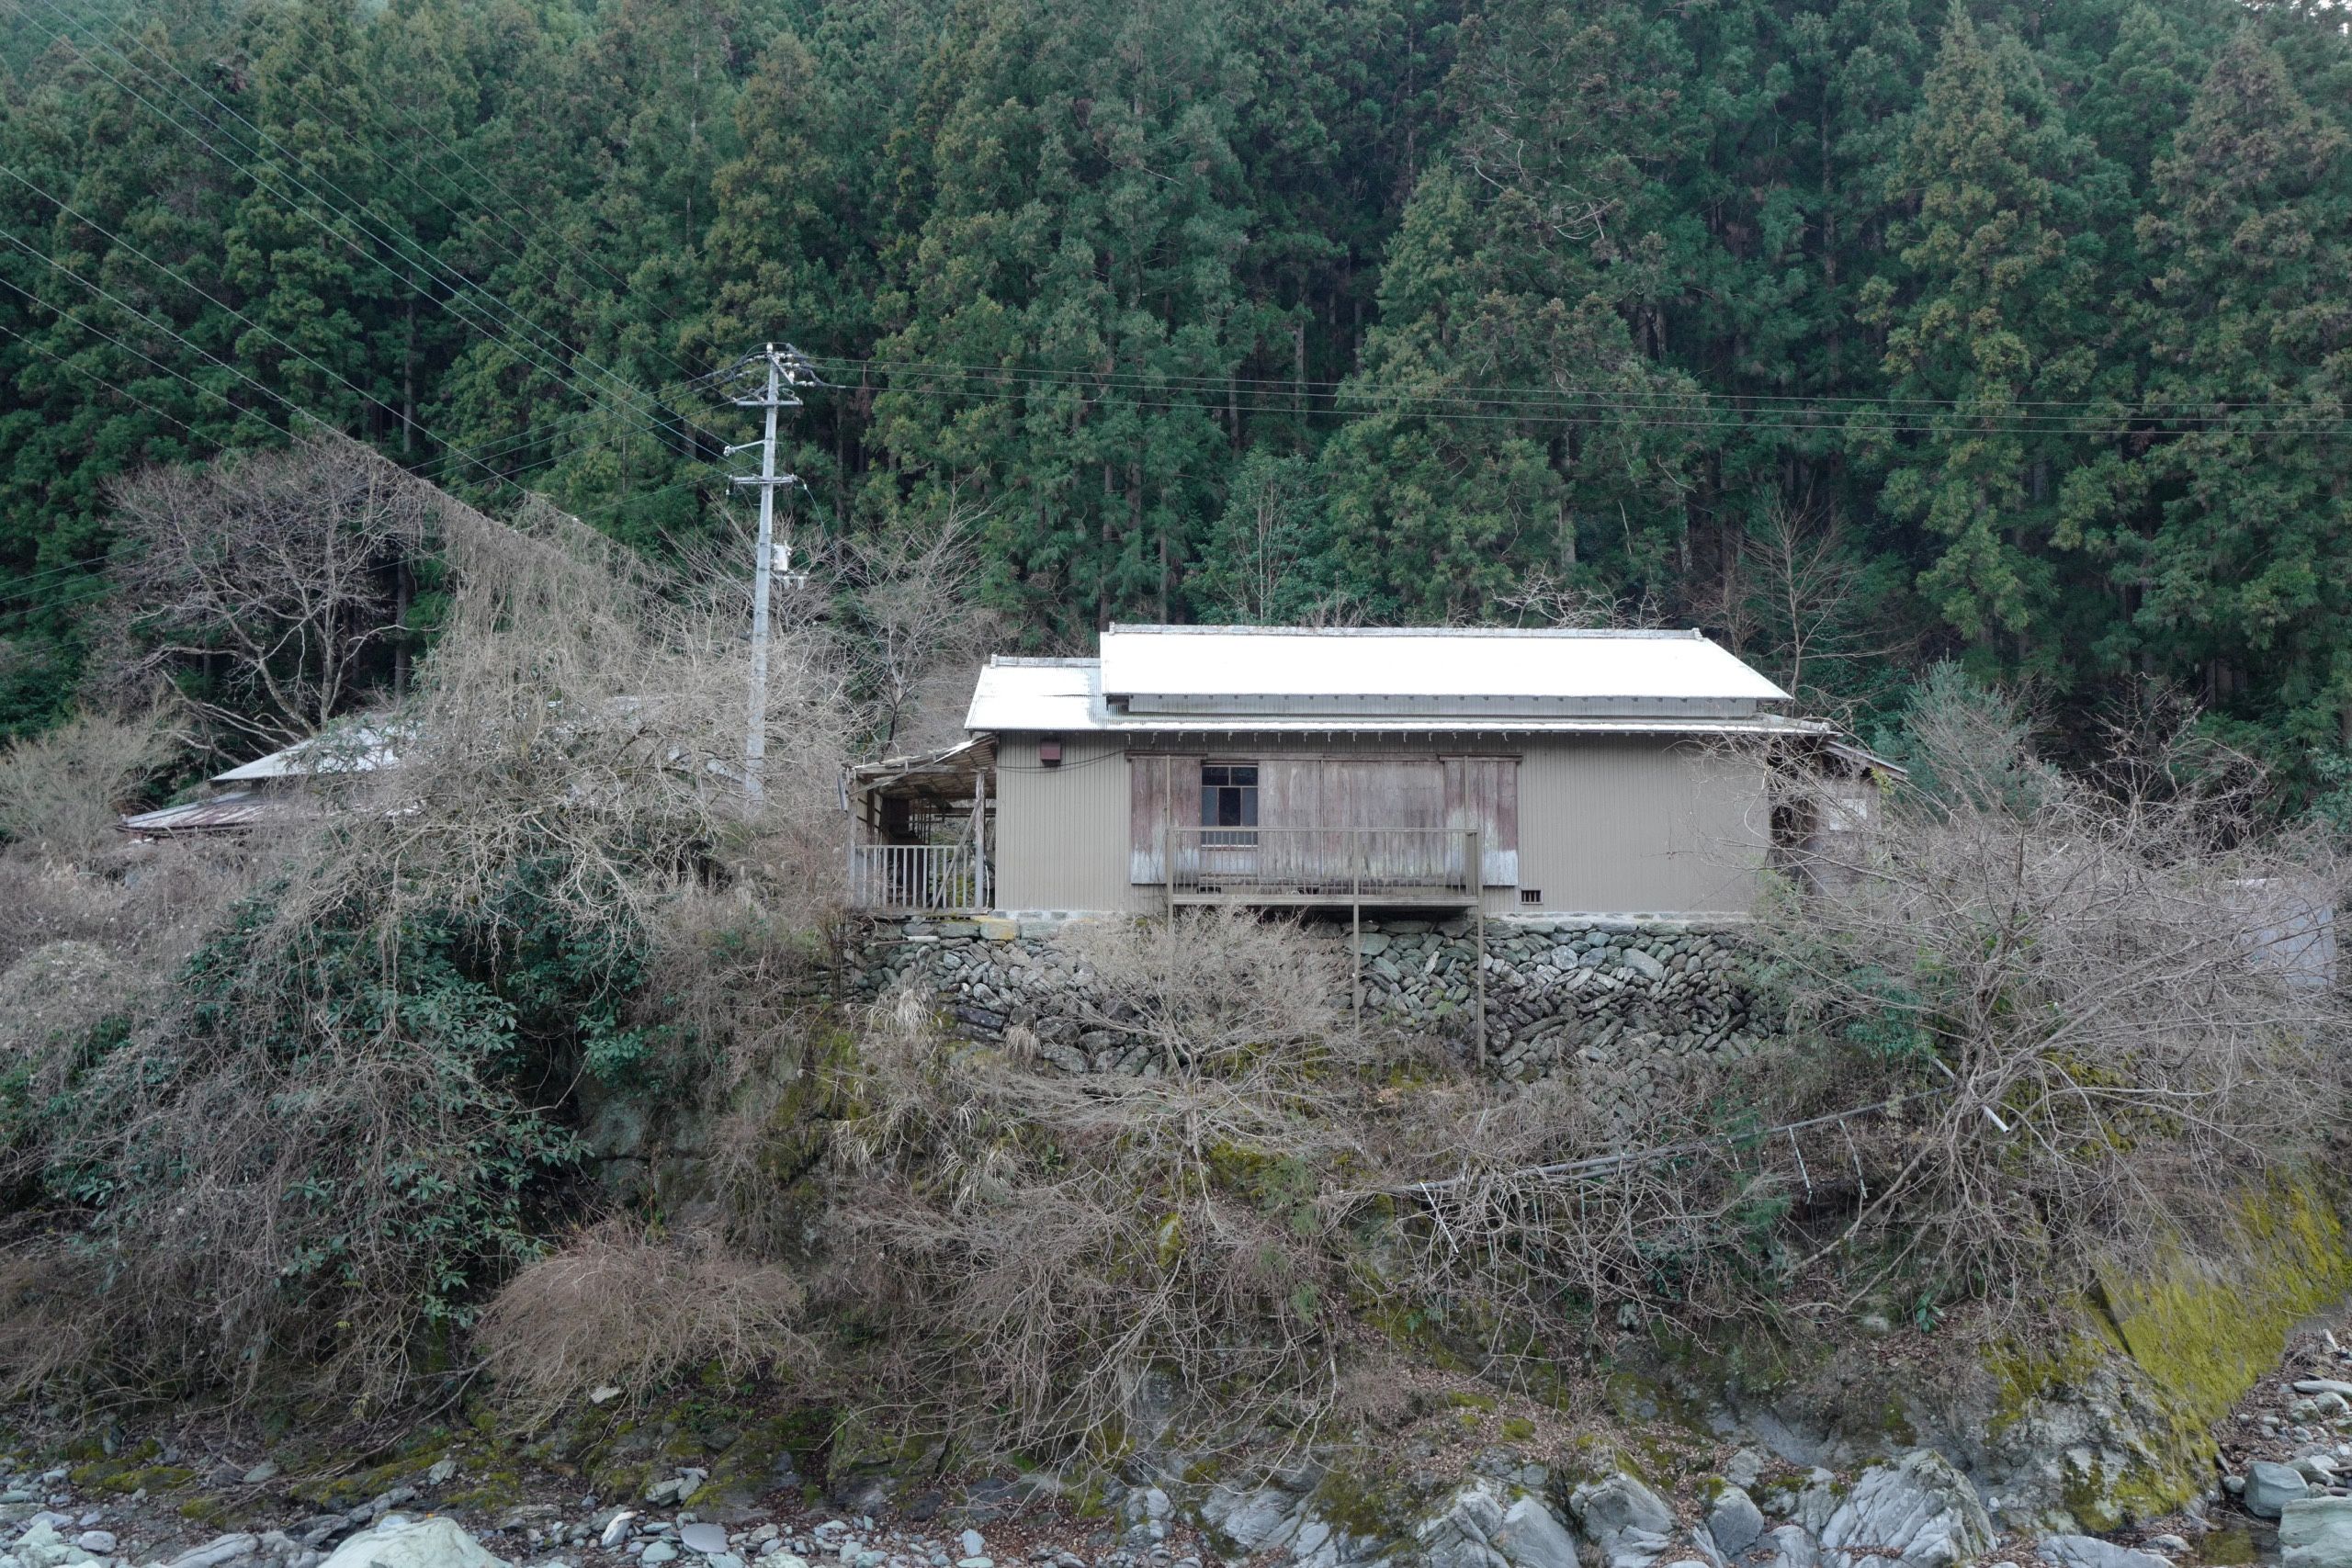 A simple white Japanese house, possibly abandoned, stands on a hillside in front of a cedar forest.